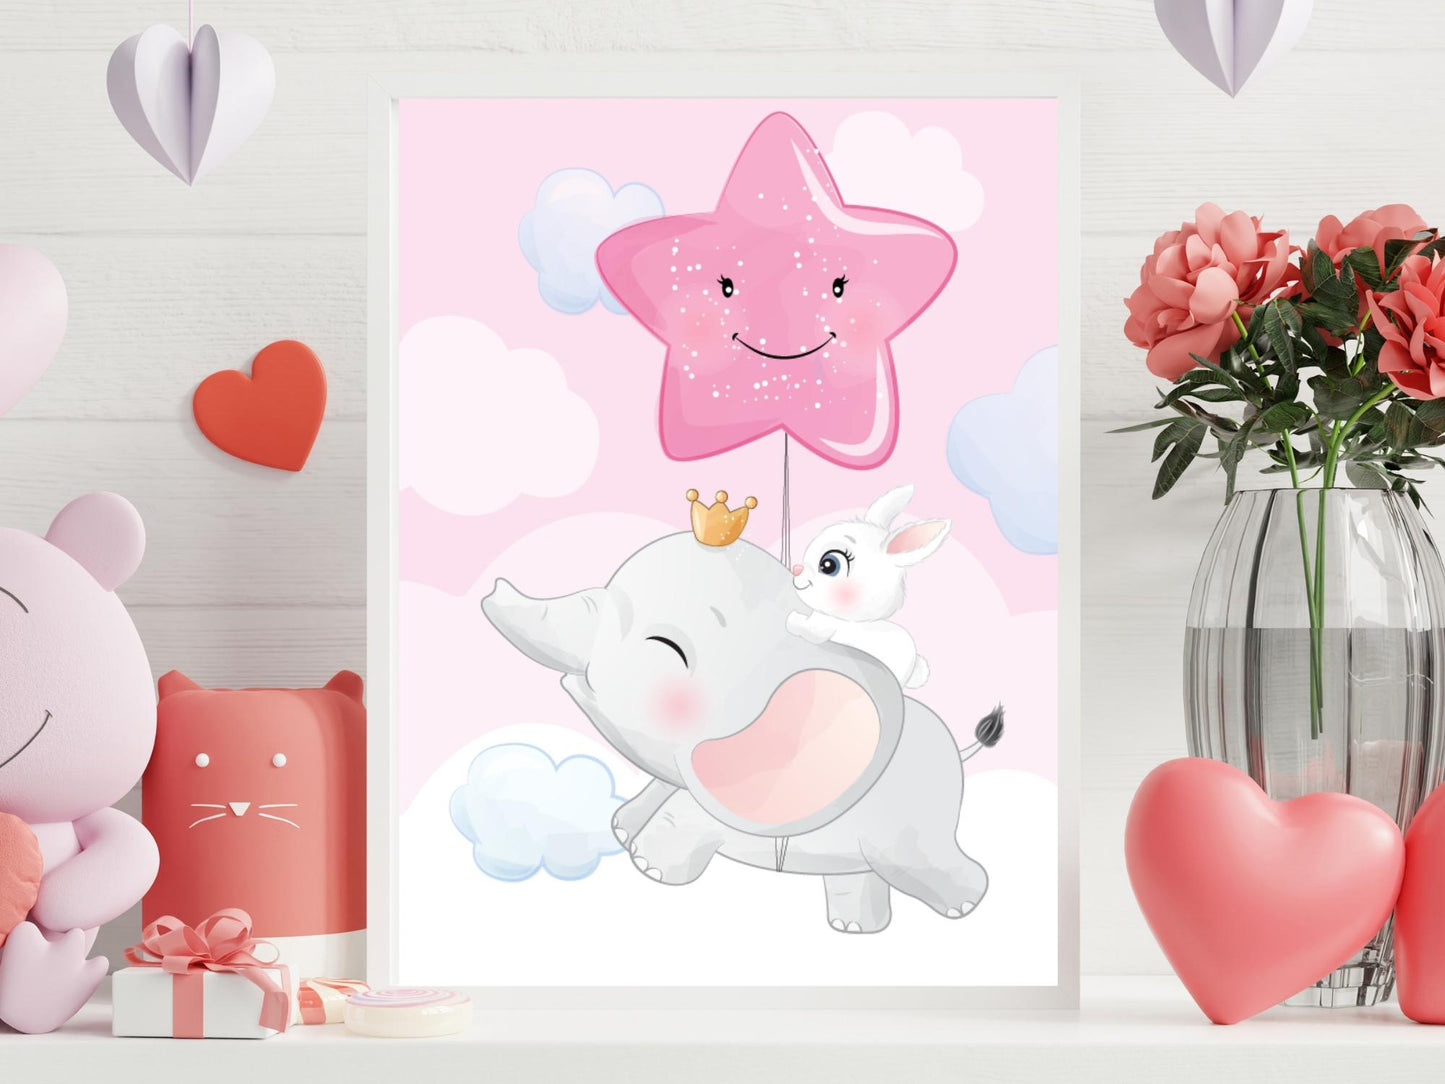 Cute elephant posters - 3 baby children's bedroom posters - Boy decoration - baby birth gift - animal wall frame - print